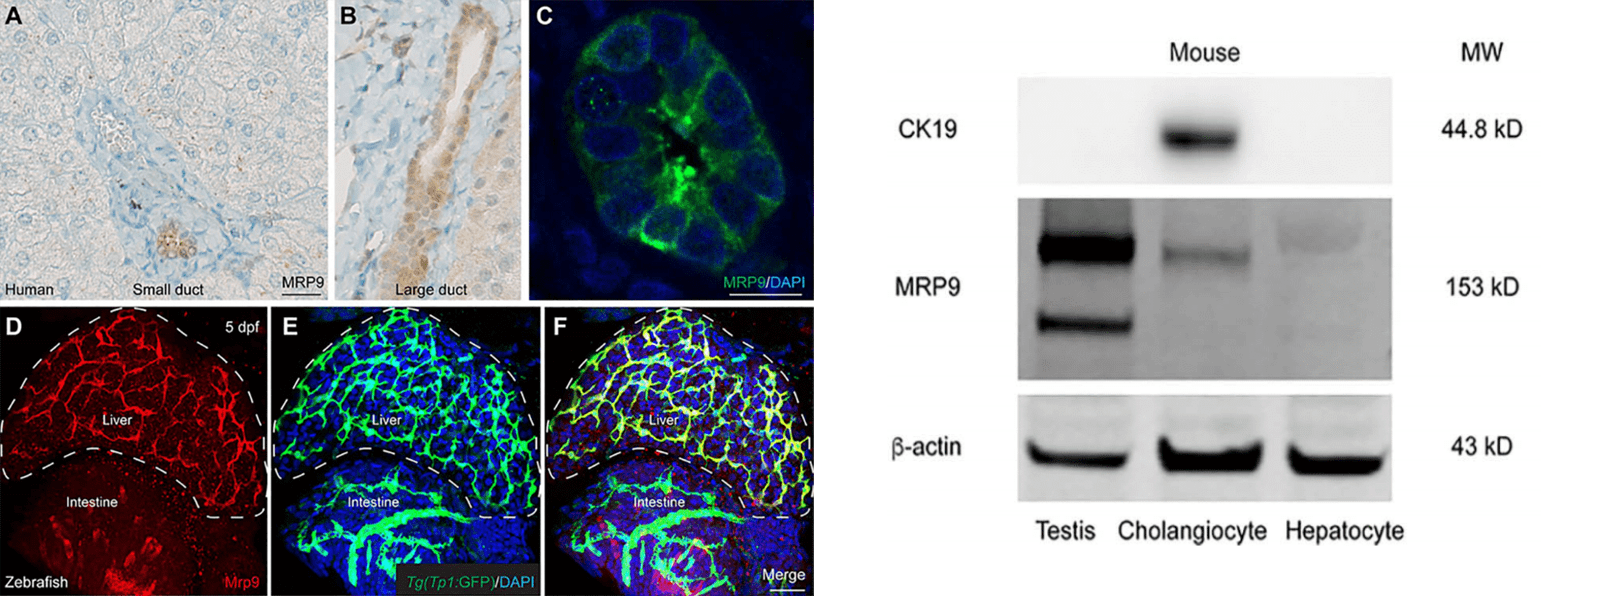 Chromogenic detection of MRP9 protein in the control liver of a child without known liver disease.